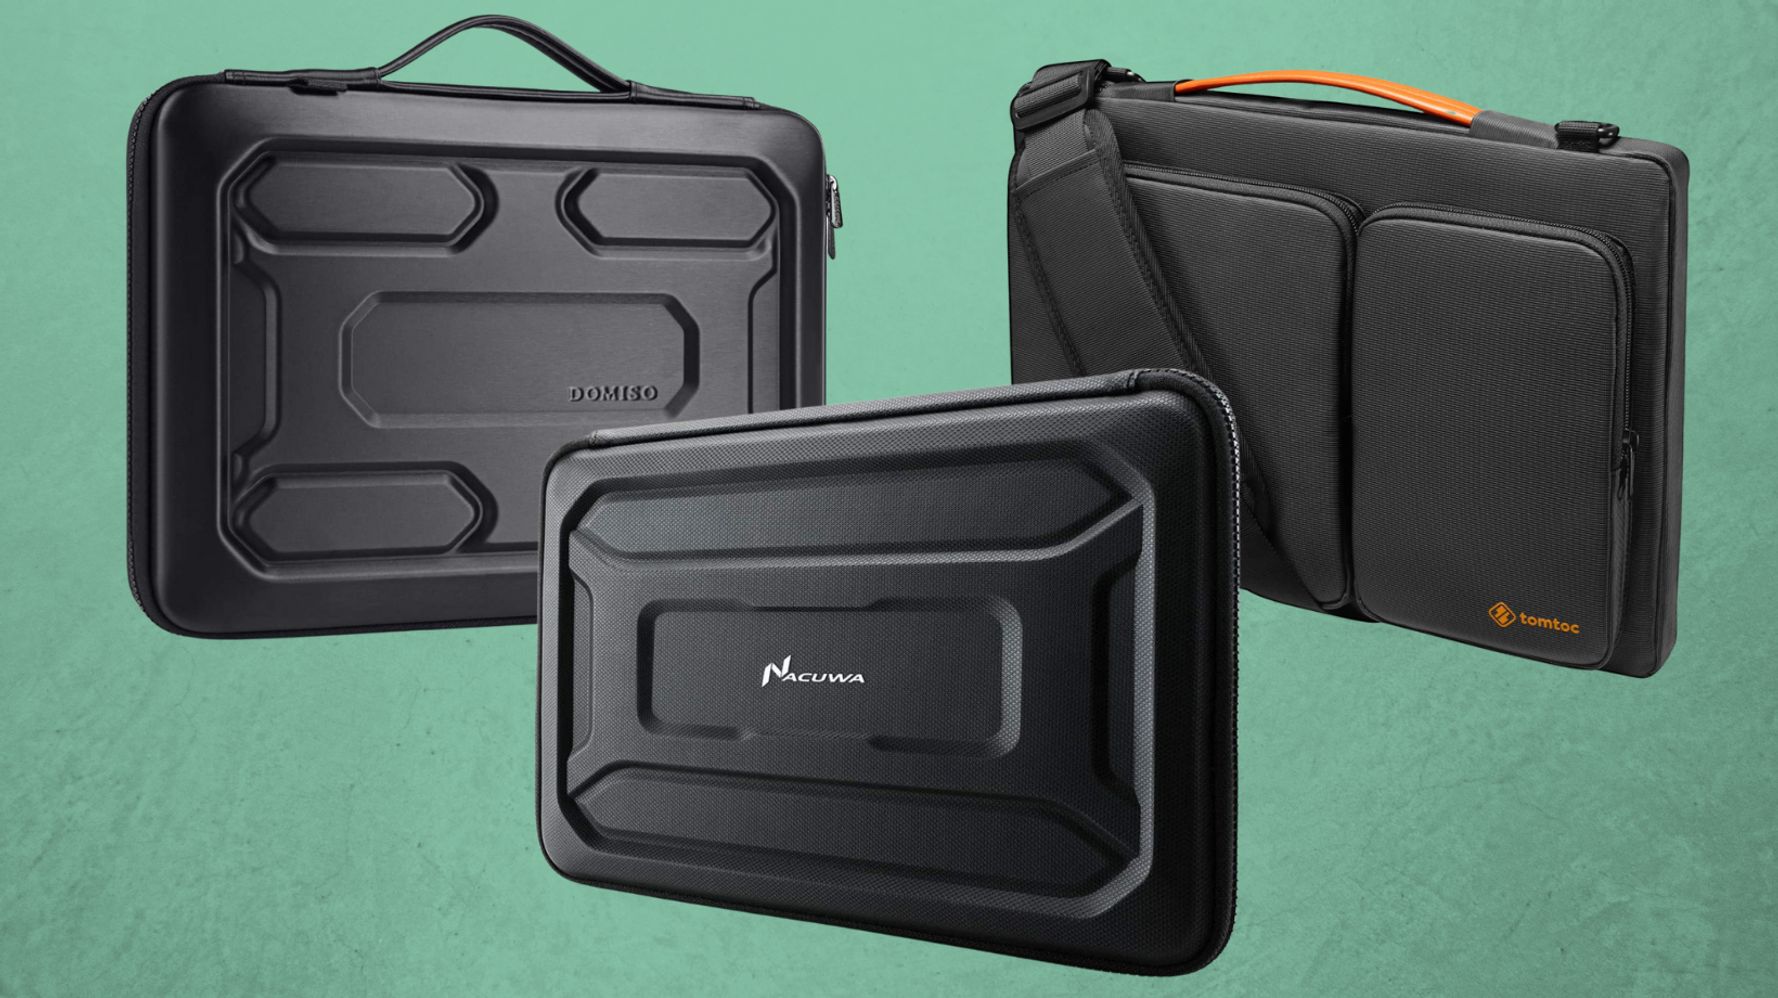 Best Laptop Cases According to Reviewers